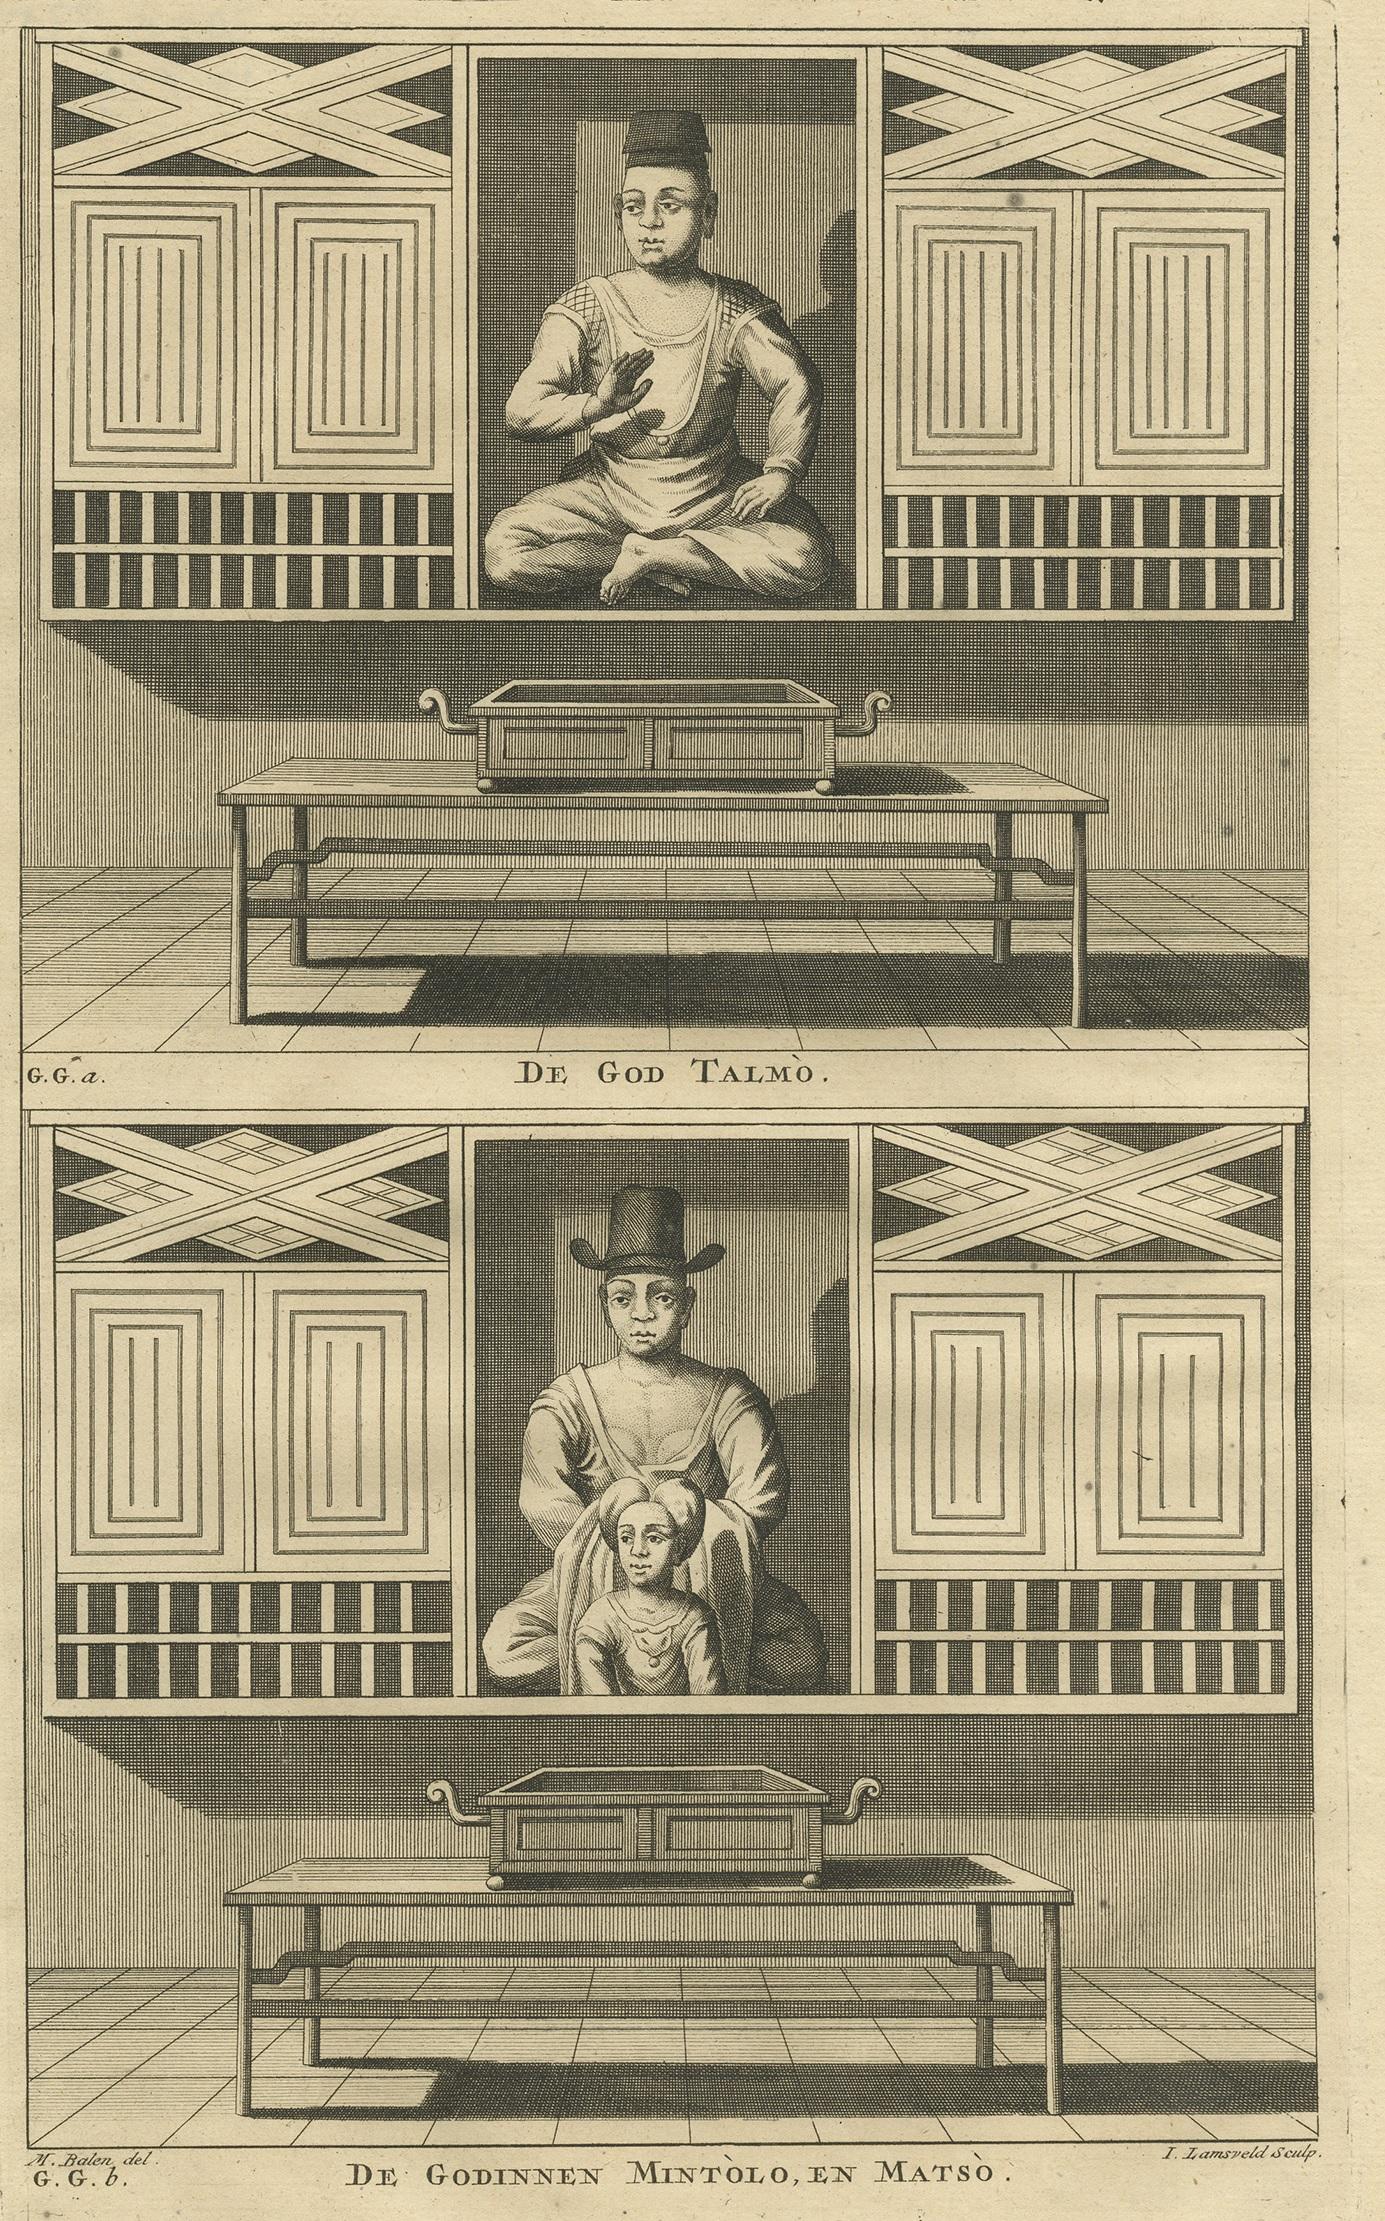 Two images on one sheet titled 'De God Talmo' and 'De Godinnen Mintolo en Matso'. This print originates from 'Oud en Nieuw Oost-Indiën' by F. Valentijn.